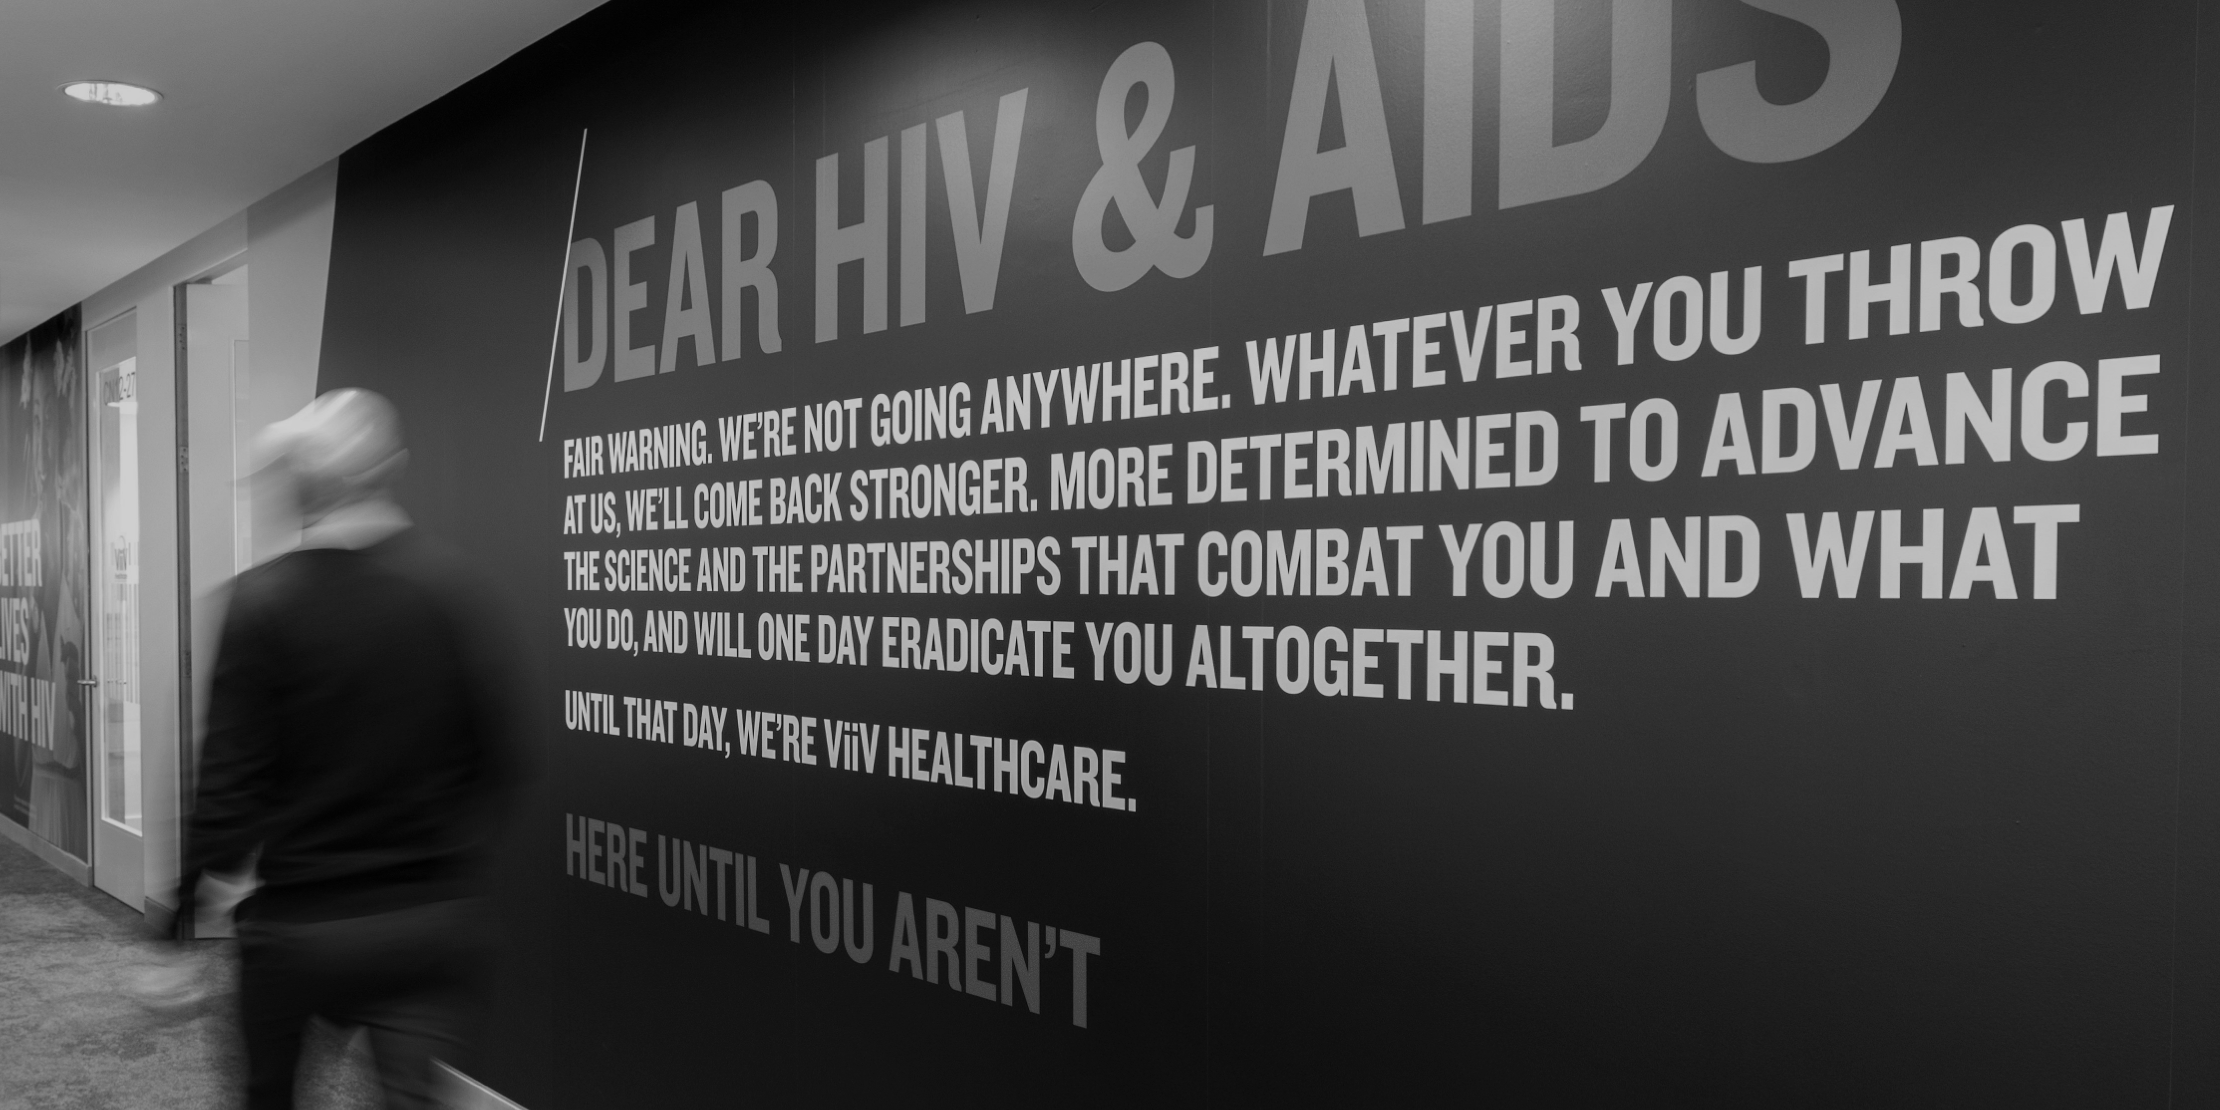 ViiV Healthcare message to HIV and AIDS